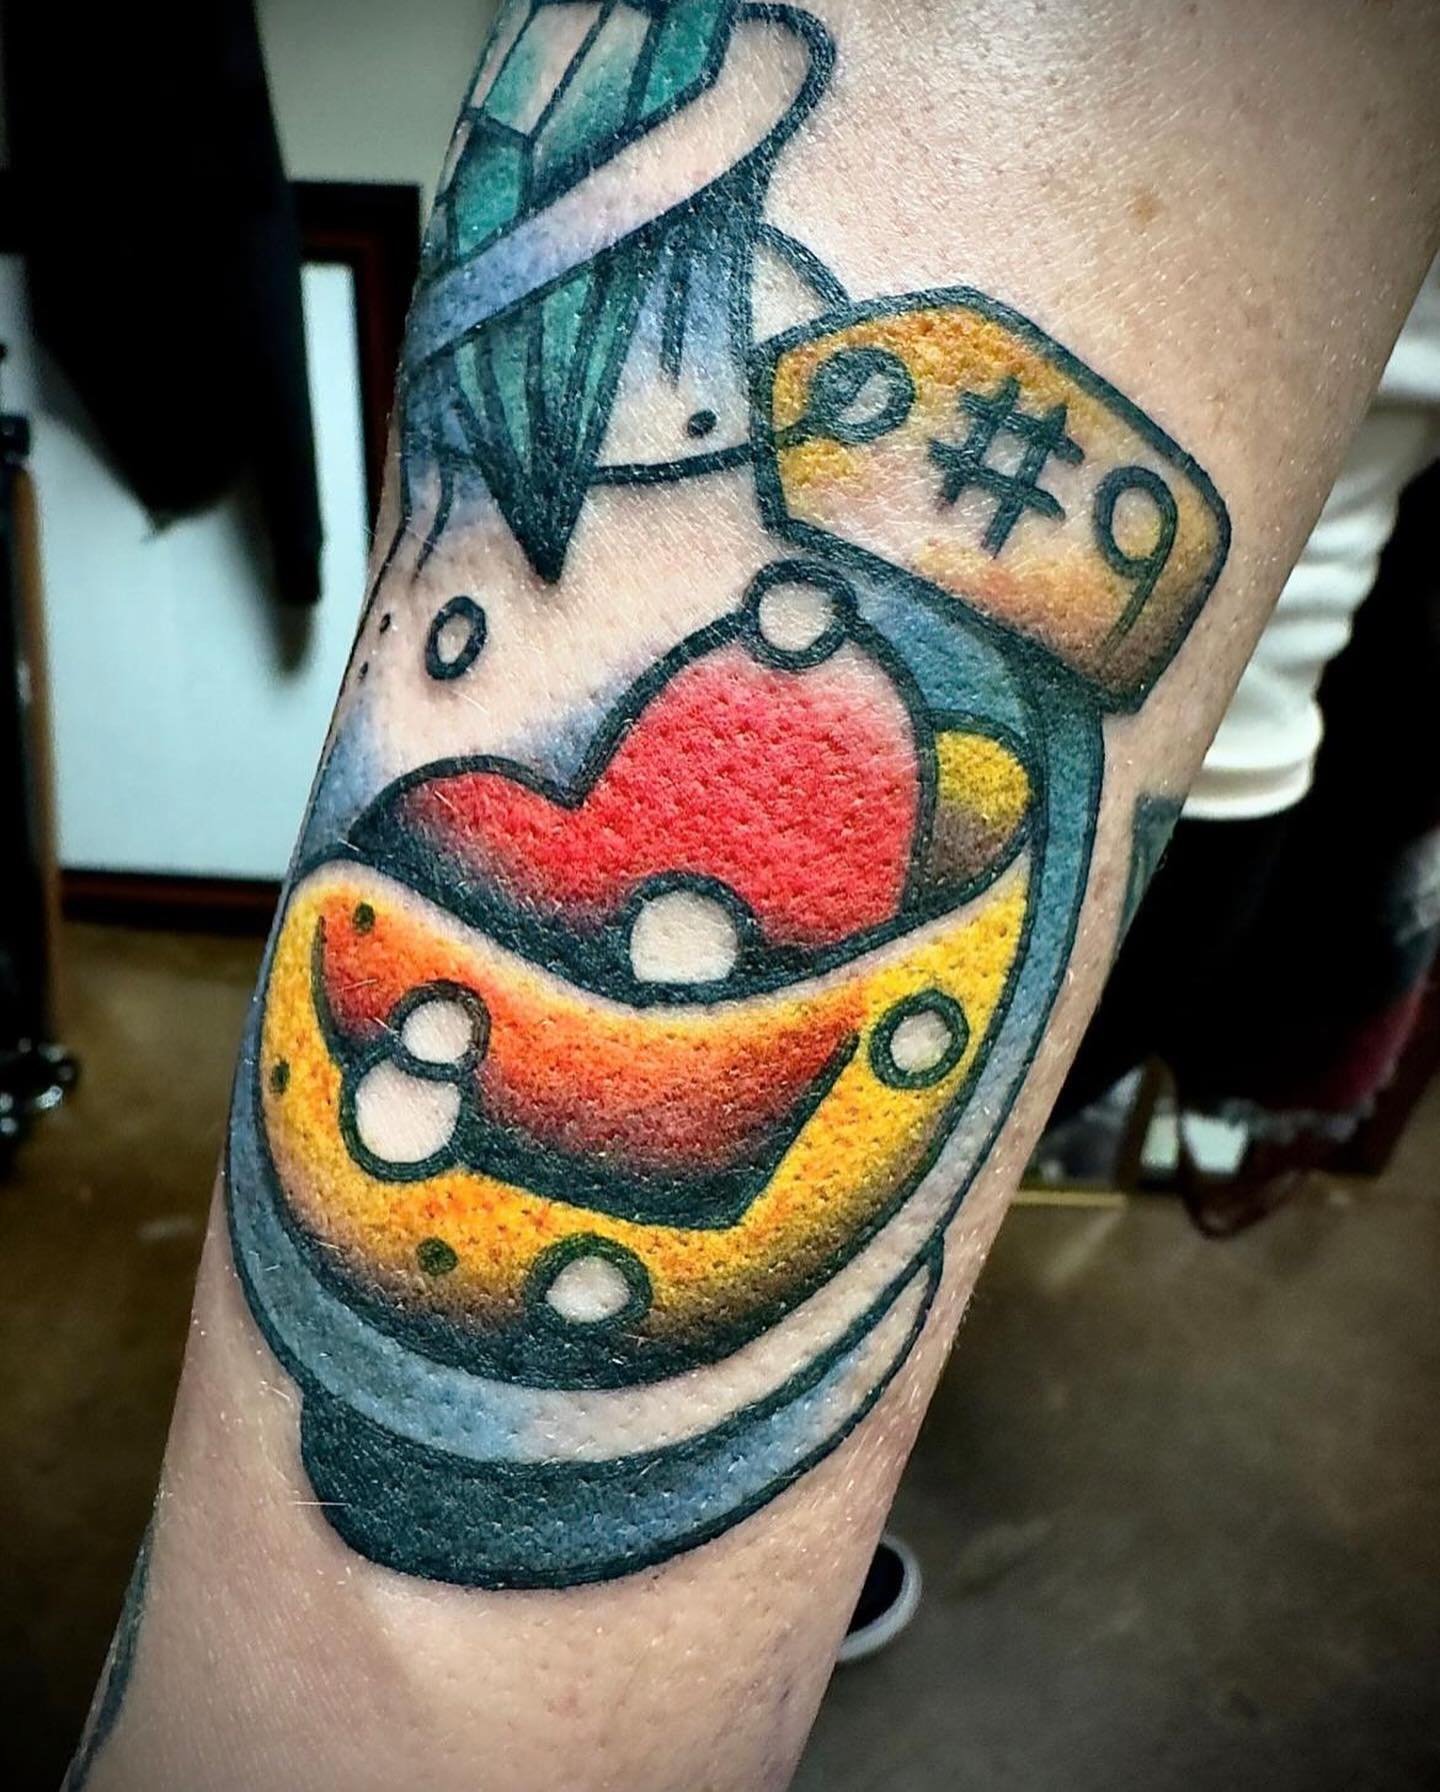 Made by @lazlowtattoo 
Book your next appointment anytime, online at www.keepsakeokc.com
See you soon!

 #tattoo #tattoos #oklahoma #oklahomacity #traditionaltattoo #oldschooltattoo #bright_and_bold #boldtattooart #boldwillhold #tradworkers #american